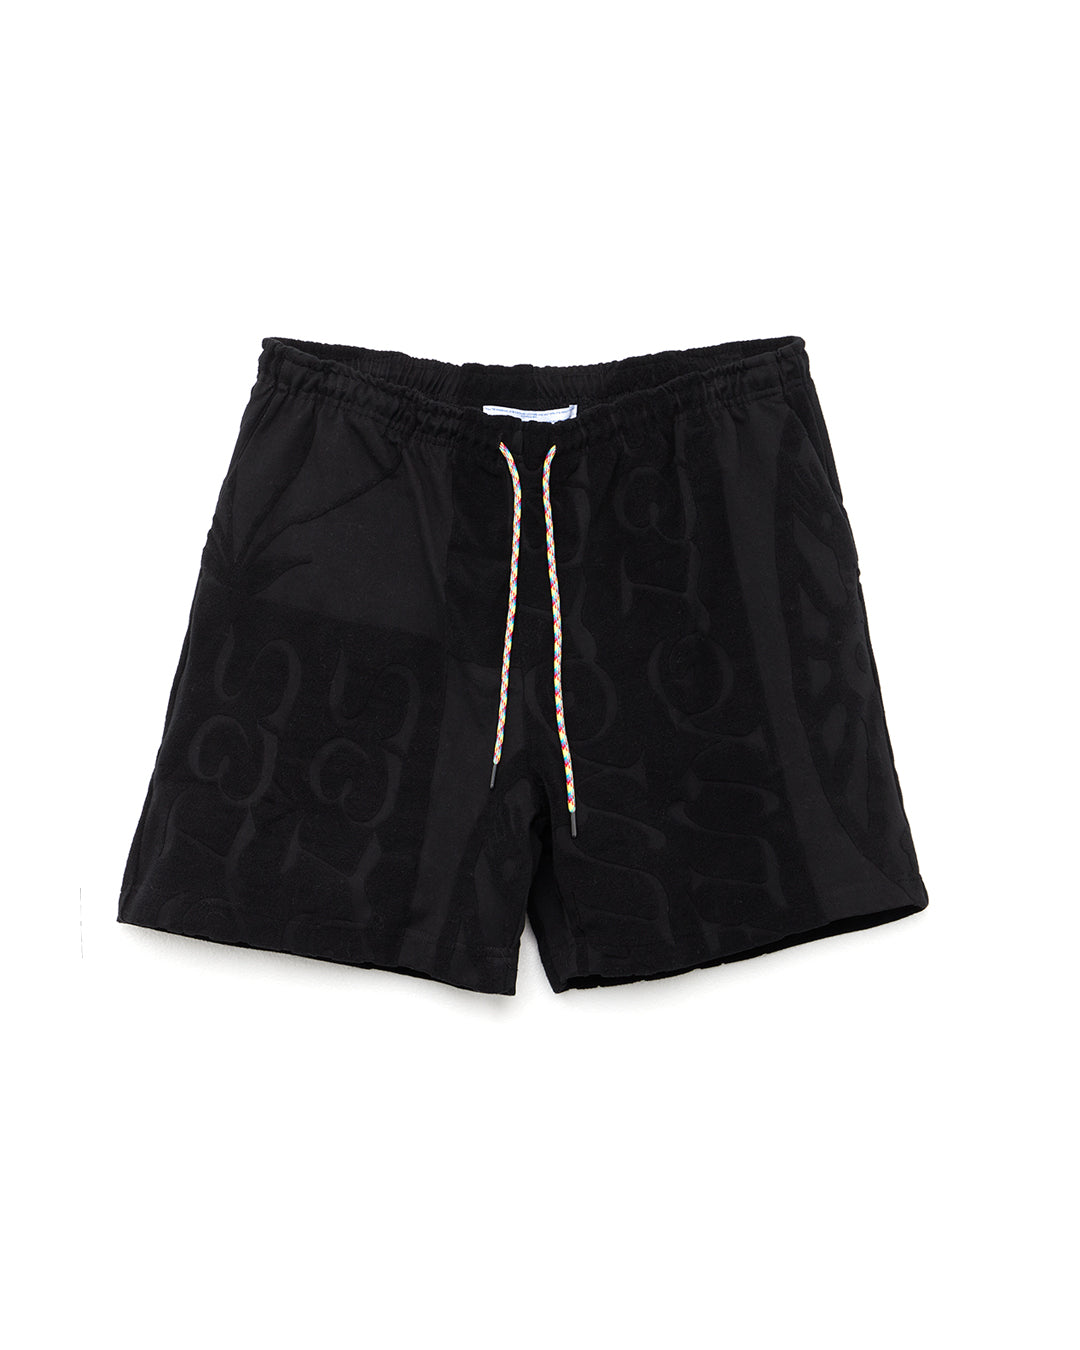 Black shorts with drawstring waistband, made from towelling material. Designed by Jungles Jungles, an australian based label. Sold in Melbourne clothing store Error404store.